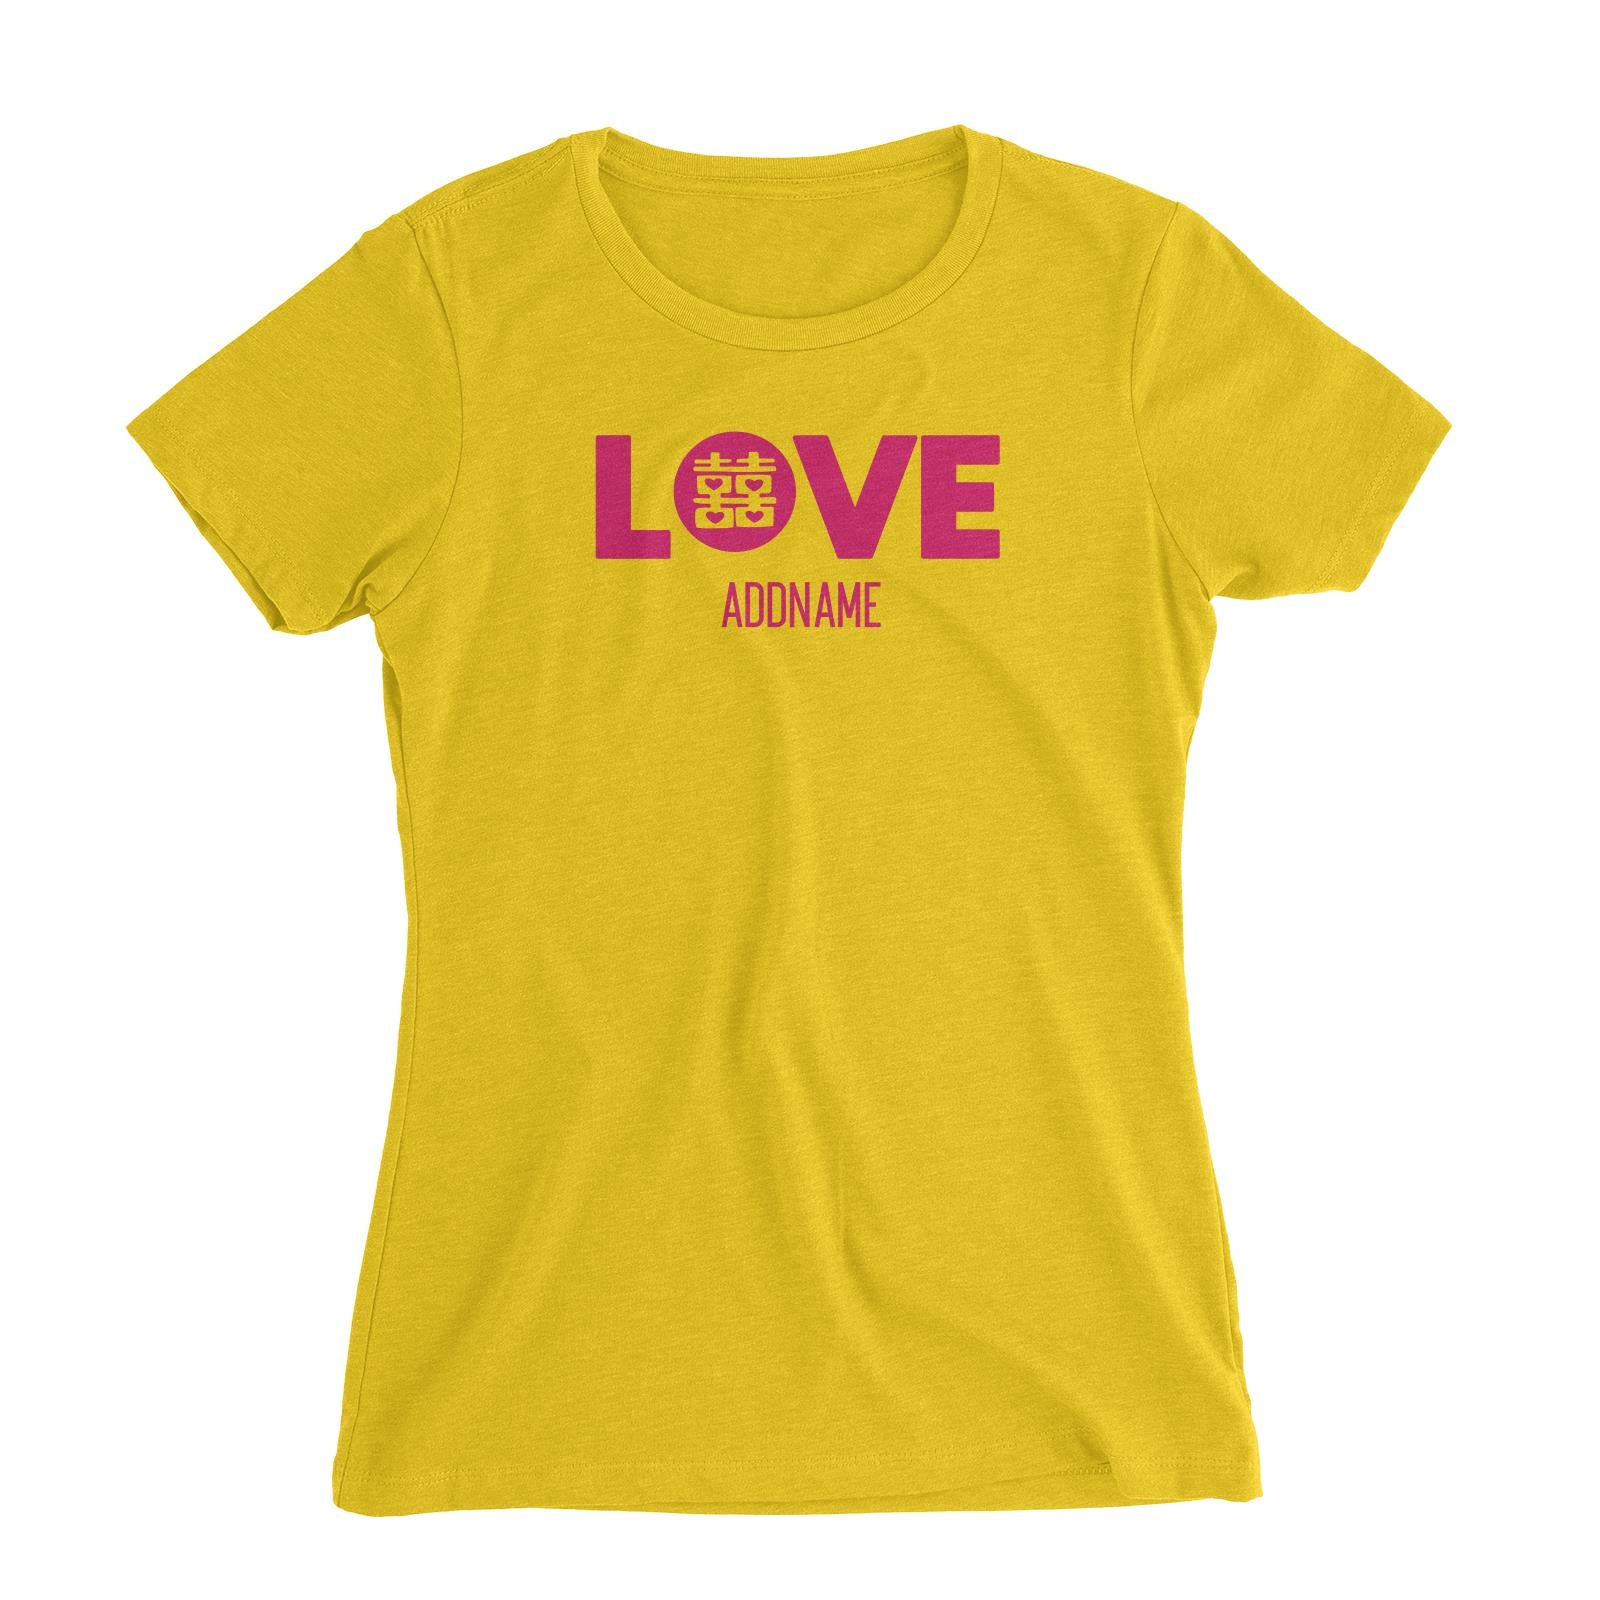 Love In Double Happiness Addname Women Slim Fit T-Shirt